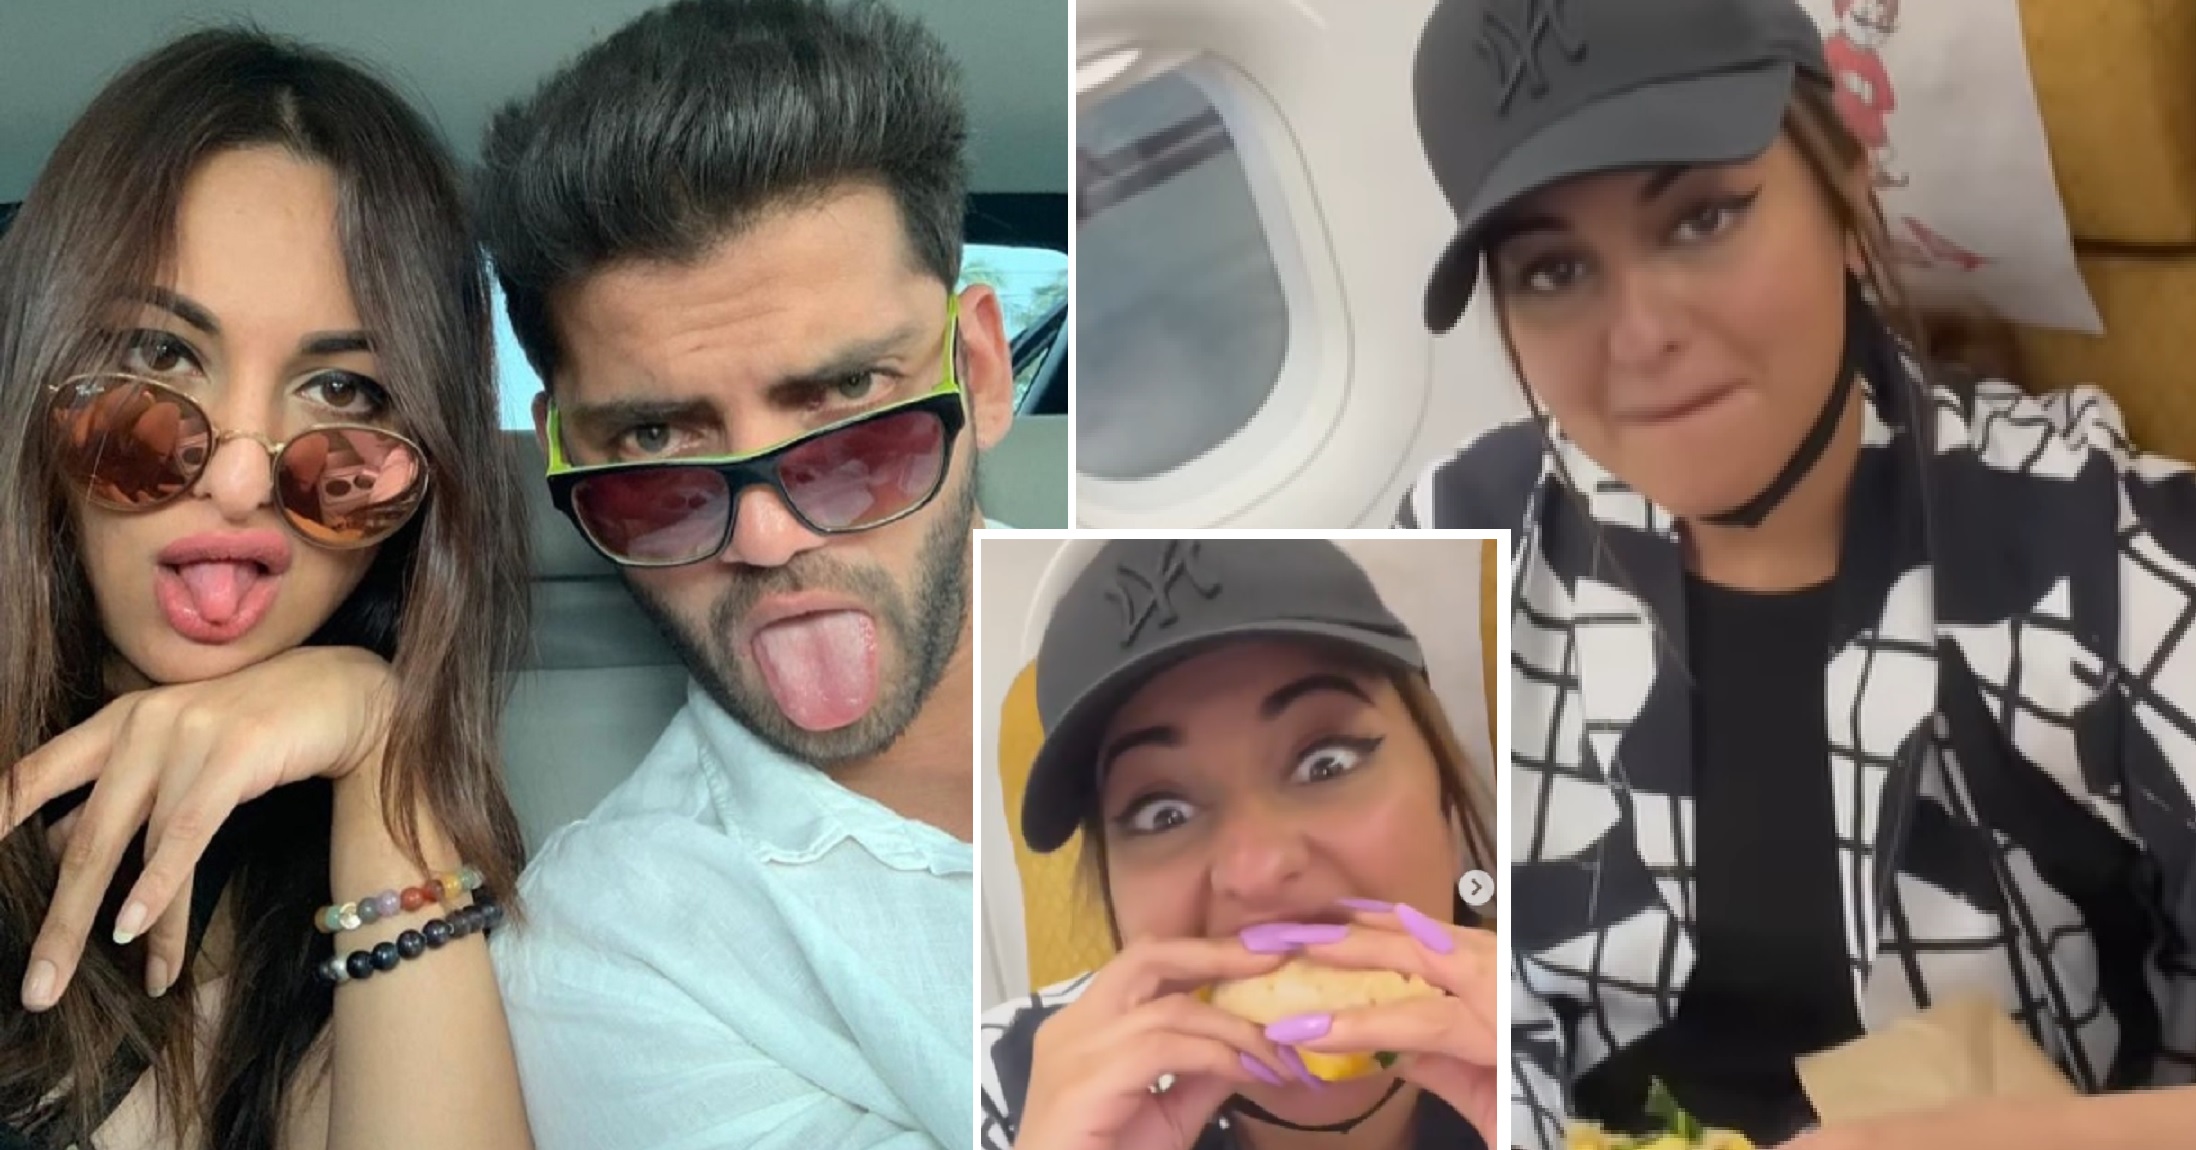 Sonakshi Sinha Confirms Relationship With Zaheer Iqbaal, Posts Goofy Video Of Eating Burger With Him In Flight